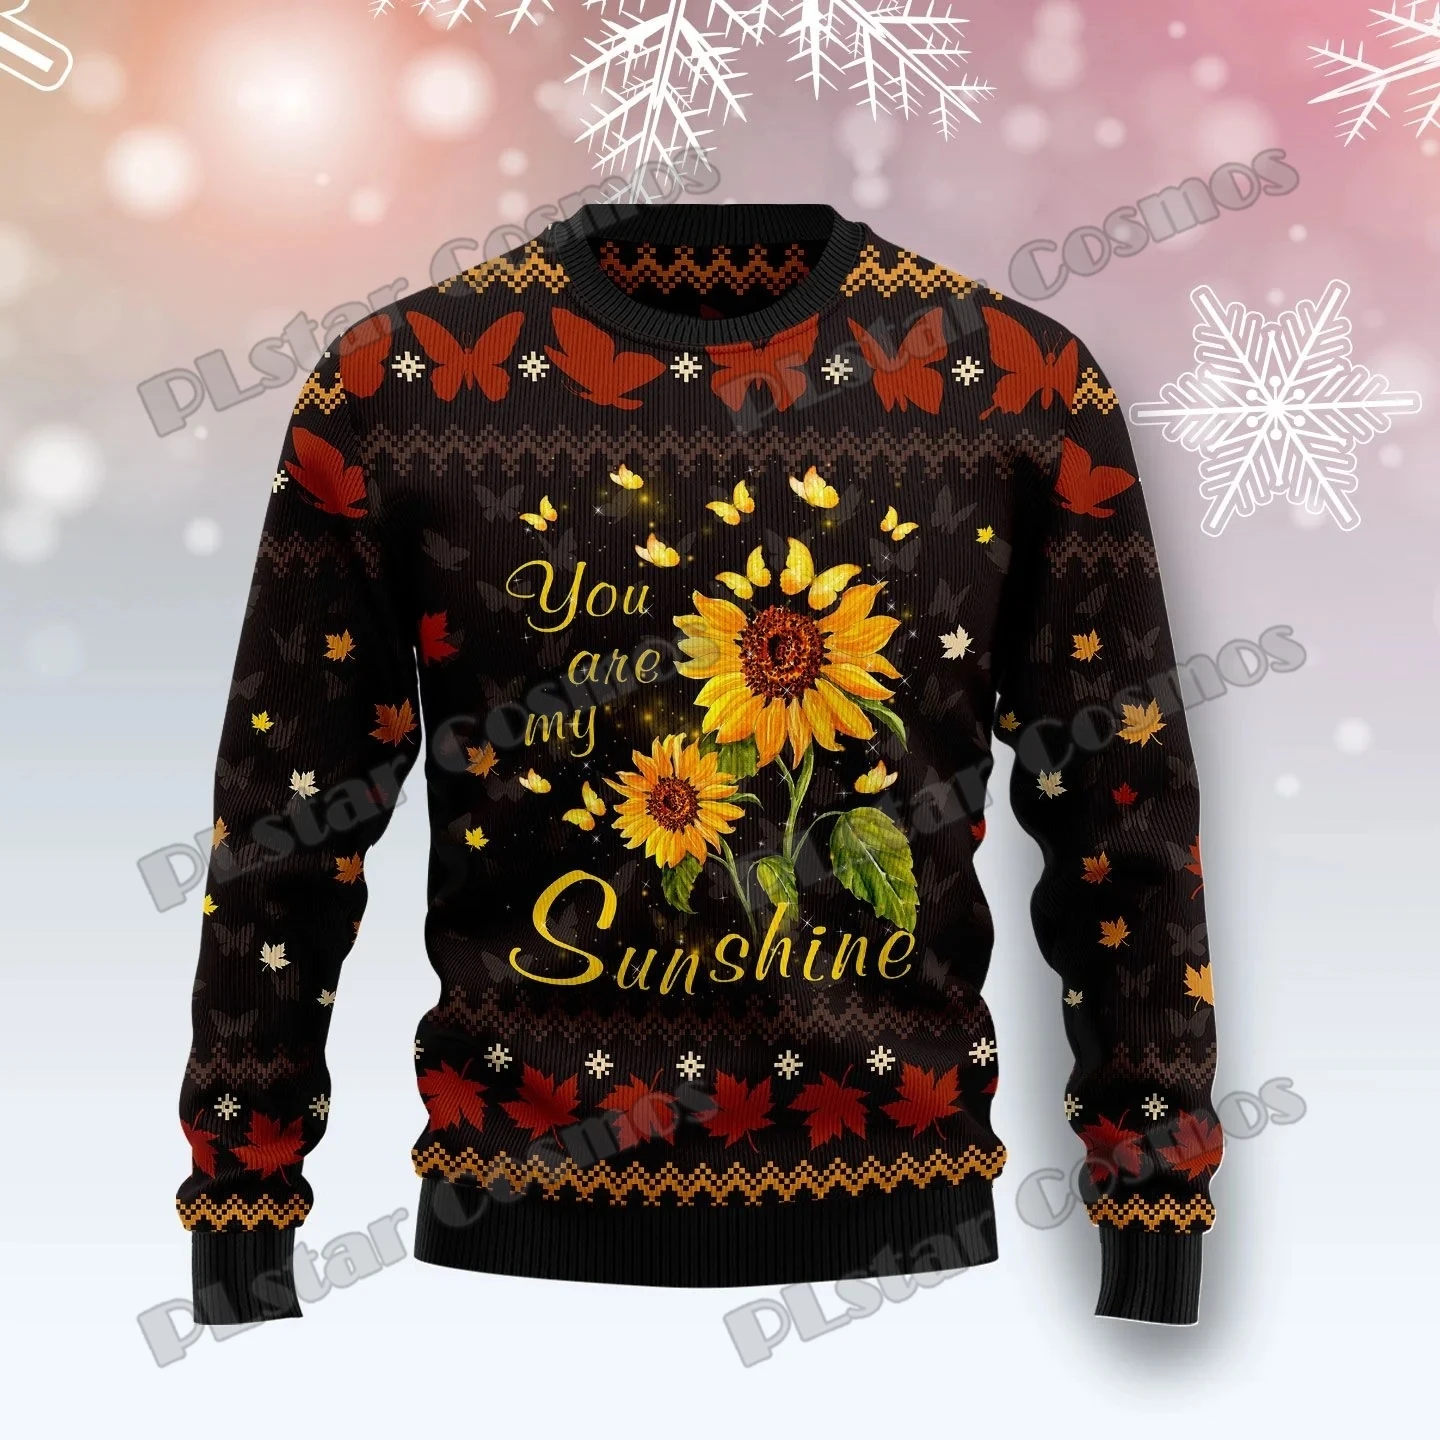 plstar cosmos new 3d printed christmas series pattern ugly sweater street casual winter sweater s 2 PLstar Cosmos Butterfly Sunshine 3D Printed Fashion Men's Ugly Christmas Sweater Winter Unisex Casual Knitwear Pullover MYY31